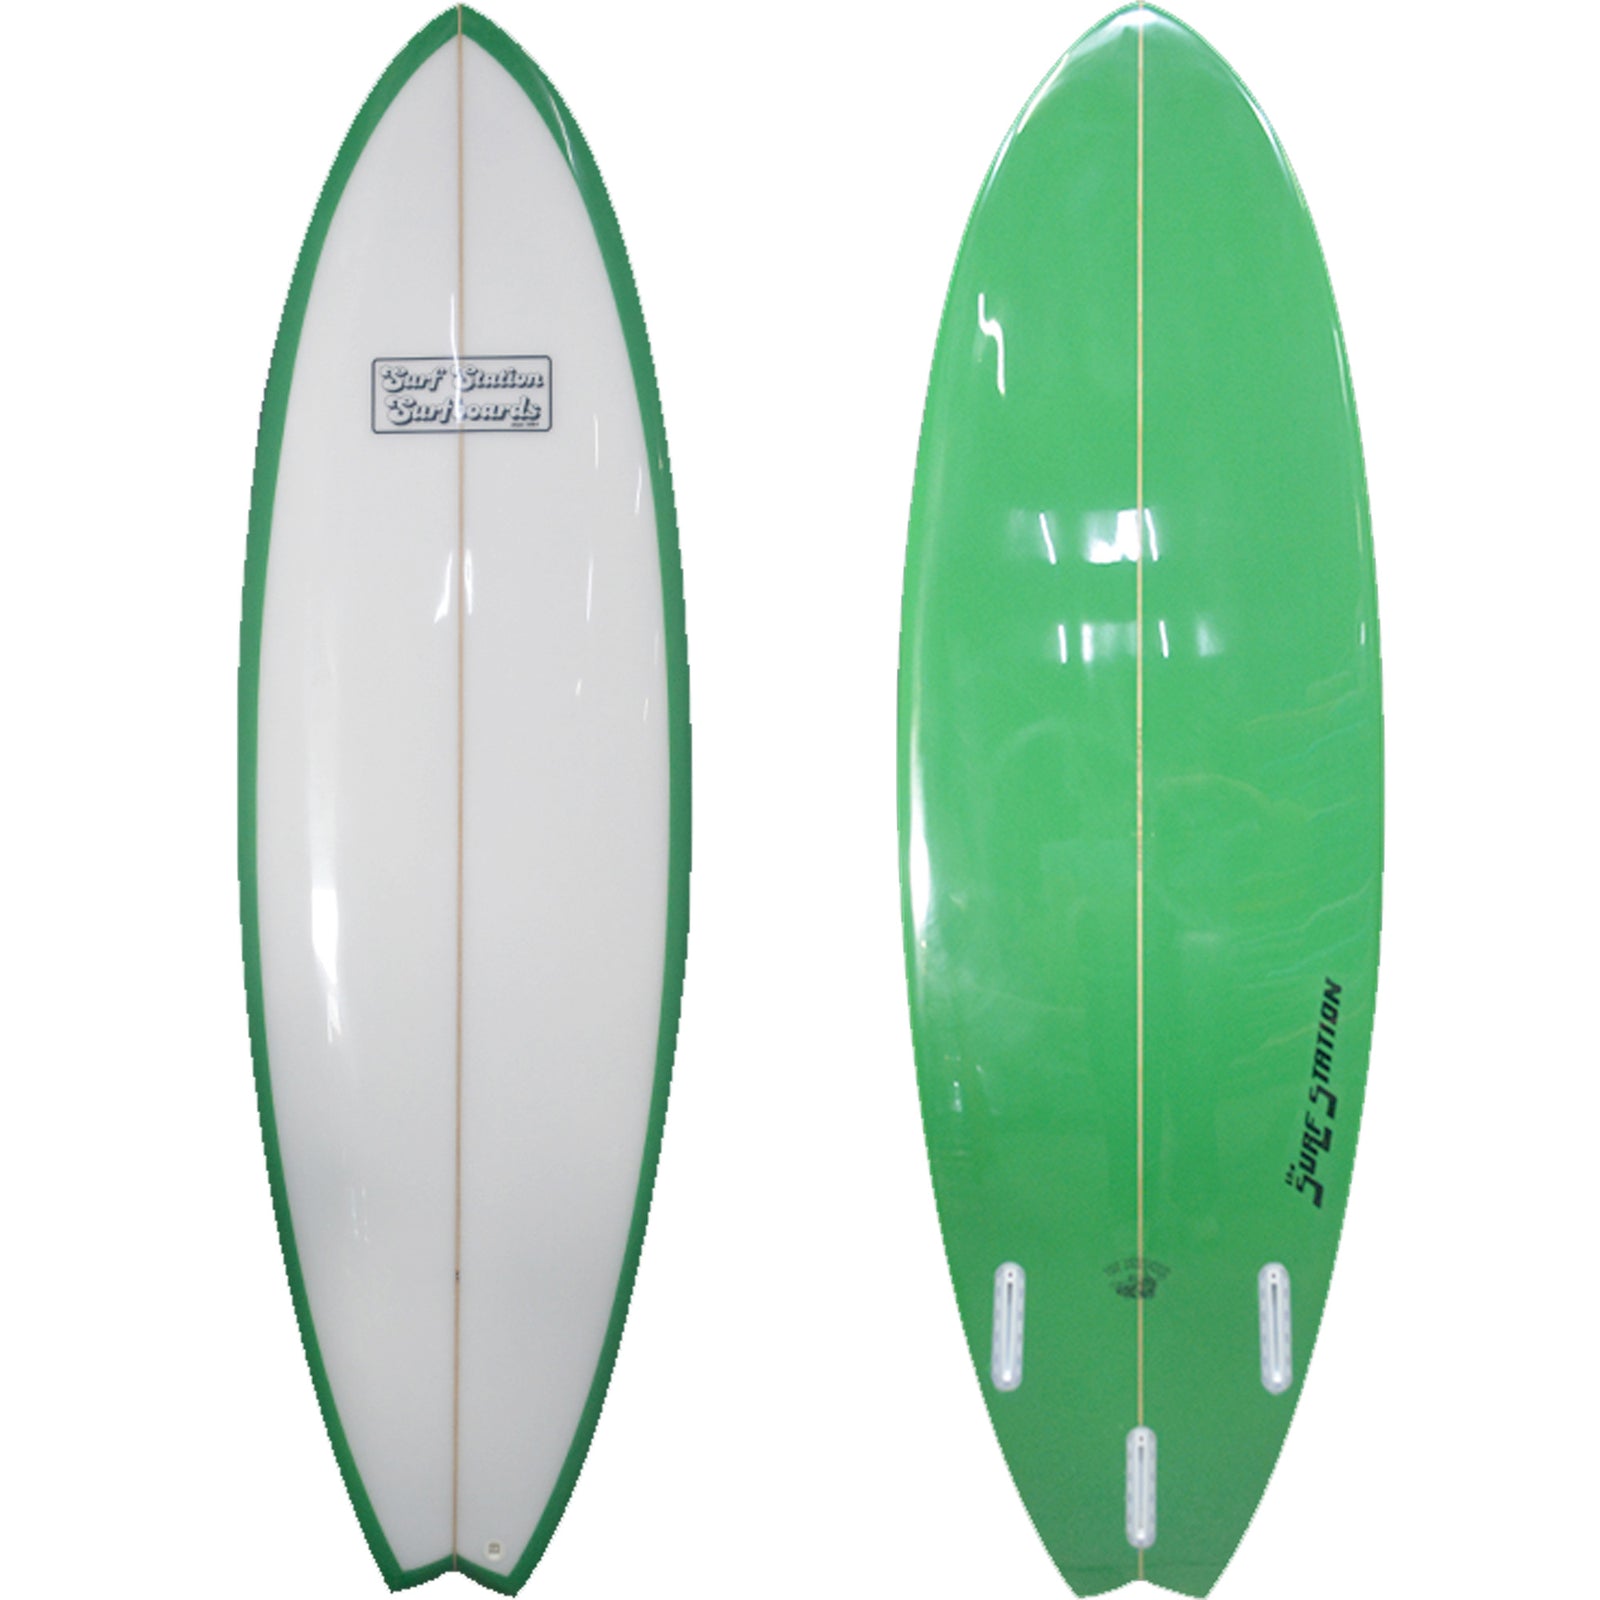 New Surfboards - Surf Station Store Tagged 